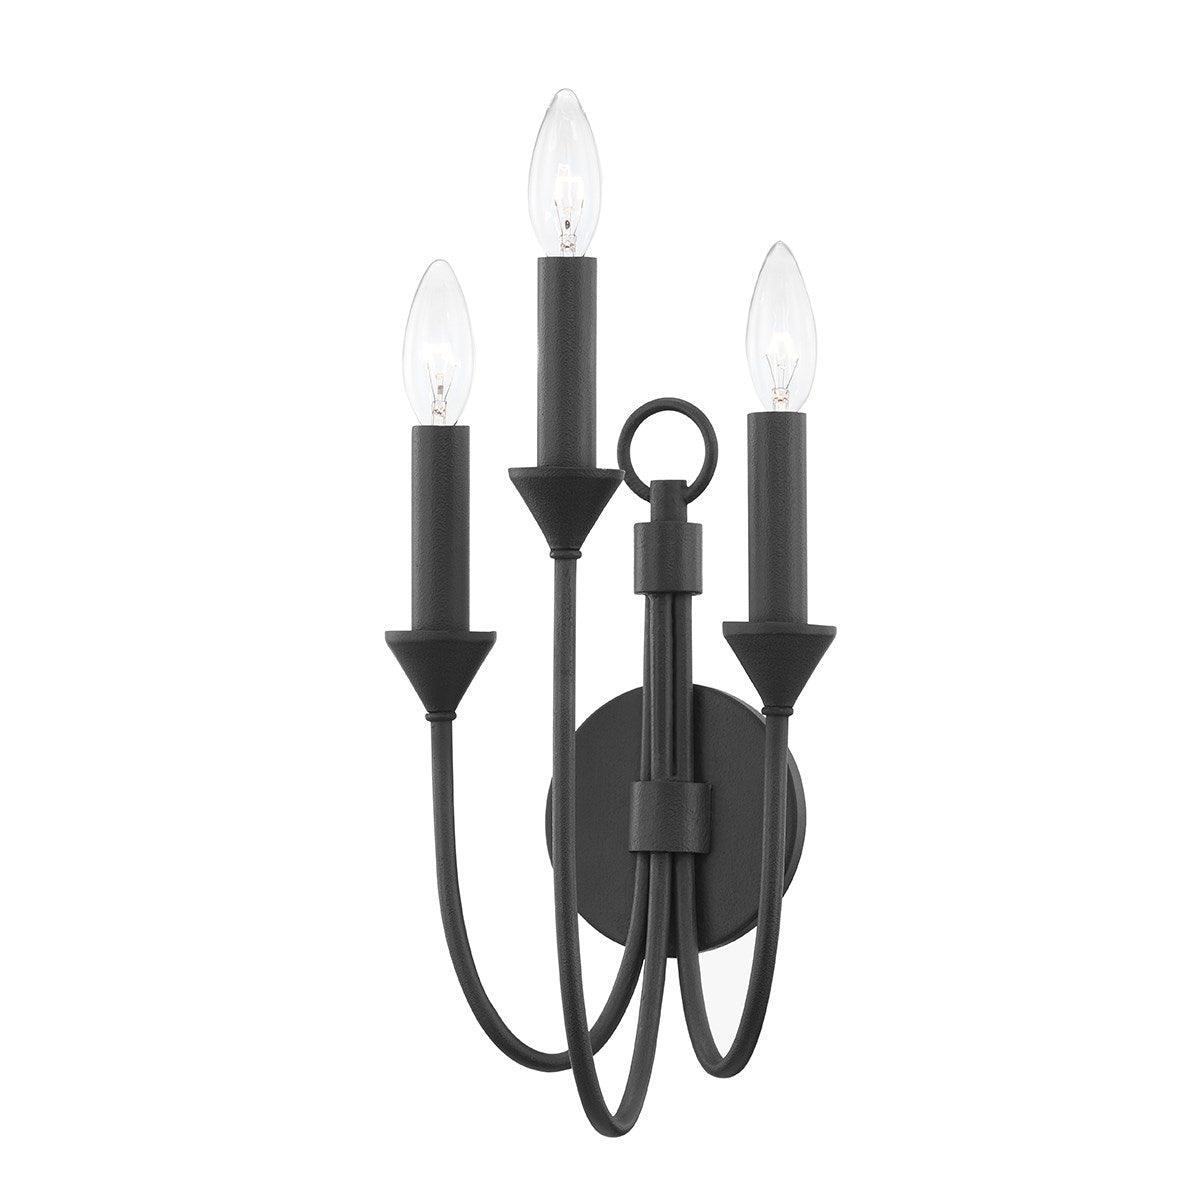 Cate 3 Light Black Wall Sconce - Reimagine Designs - new, Sconce